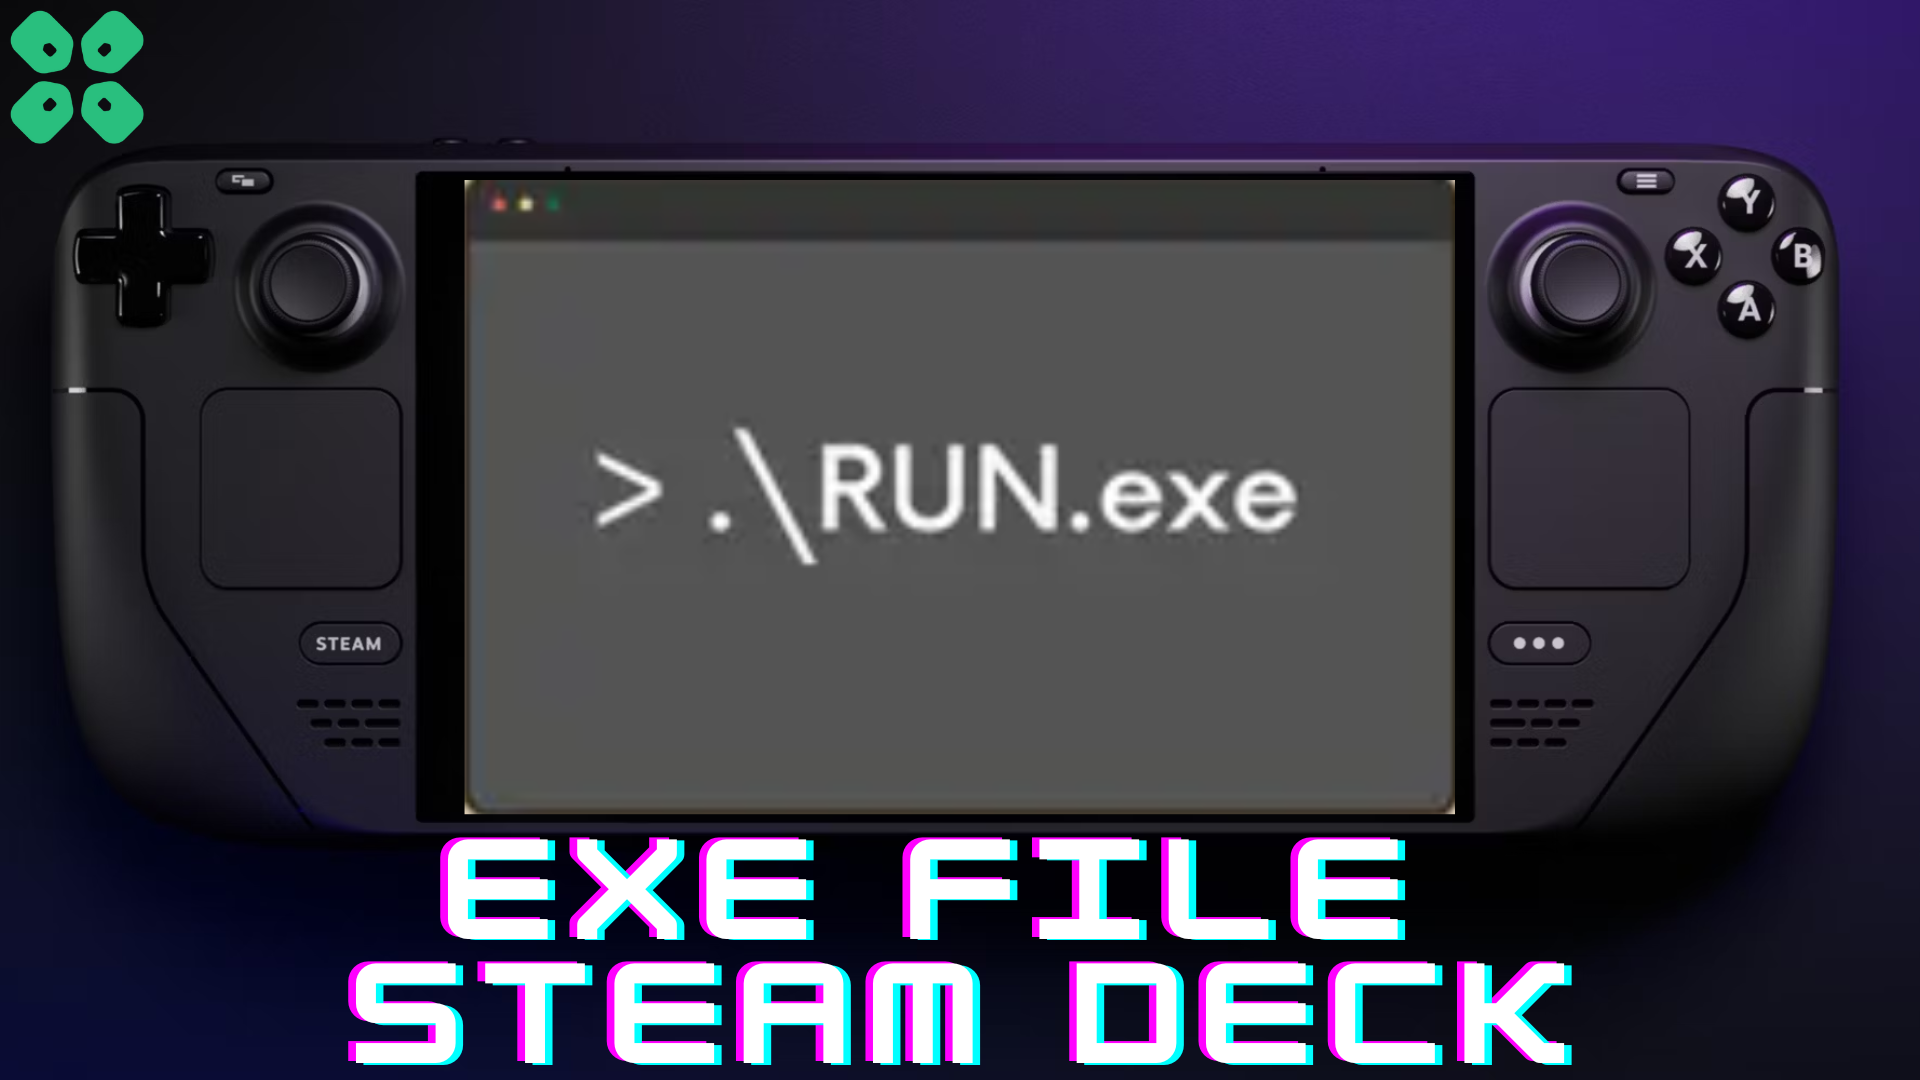 How to Run EXE File on Steam Deck